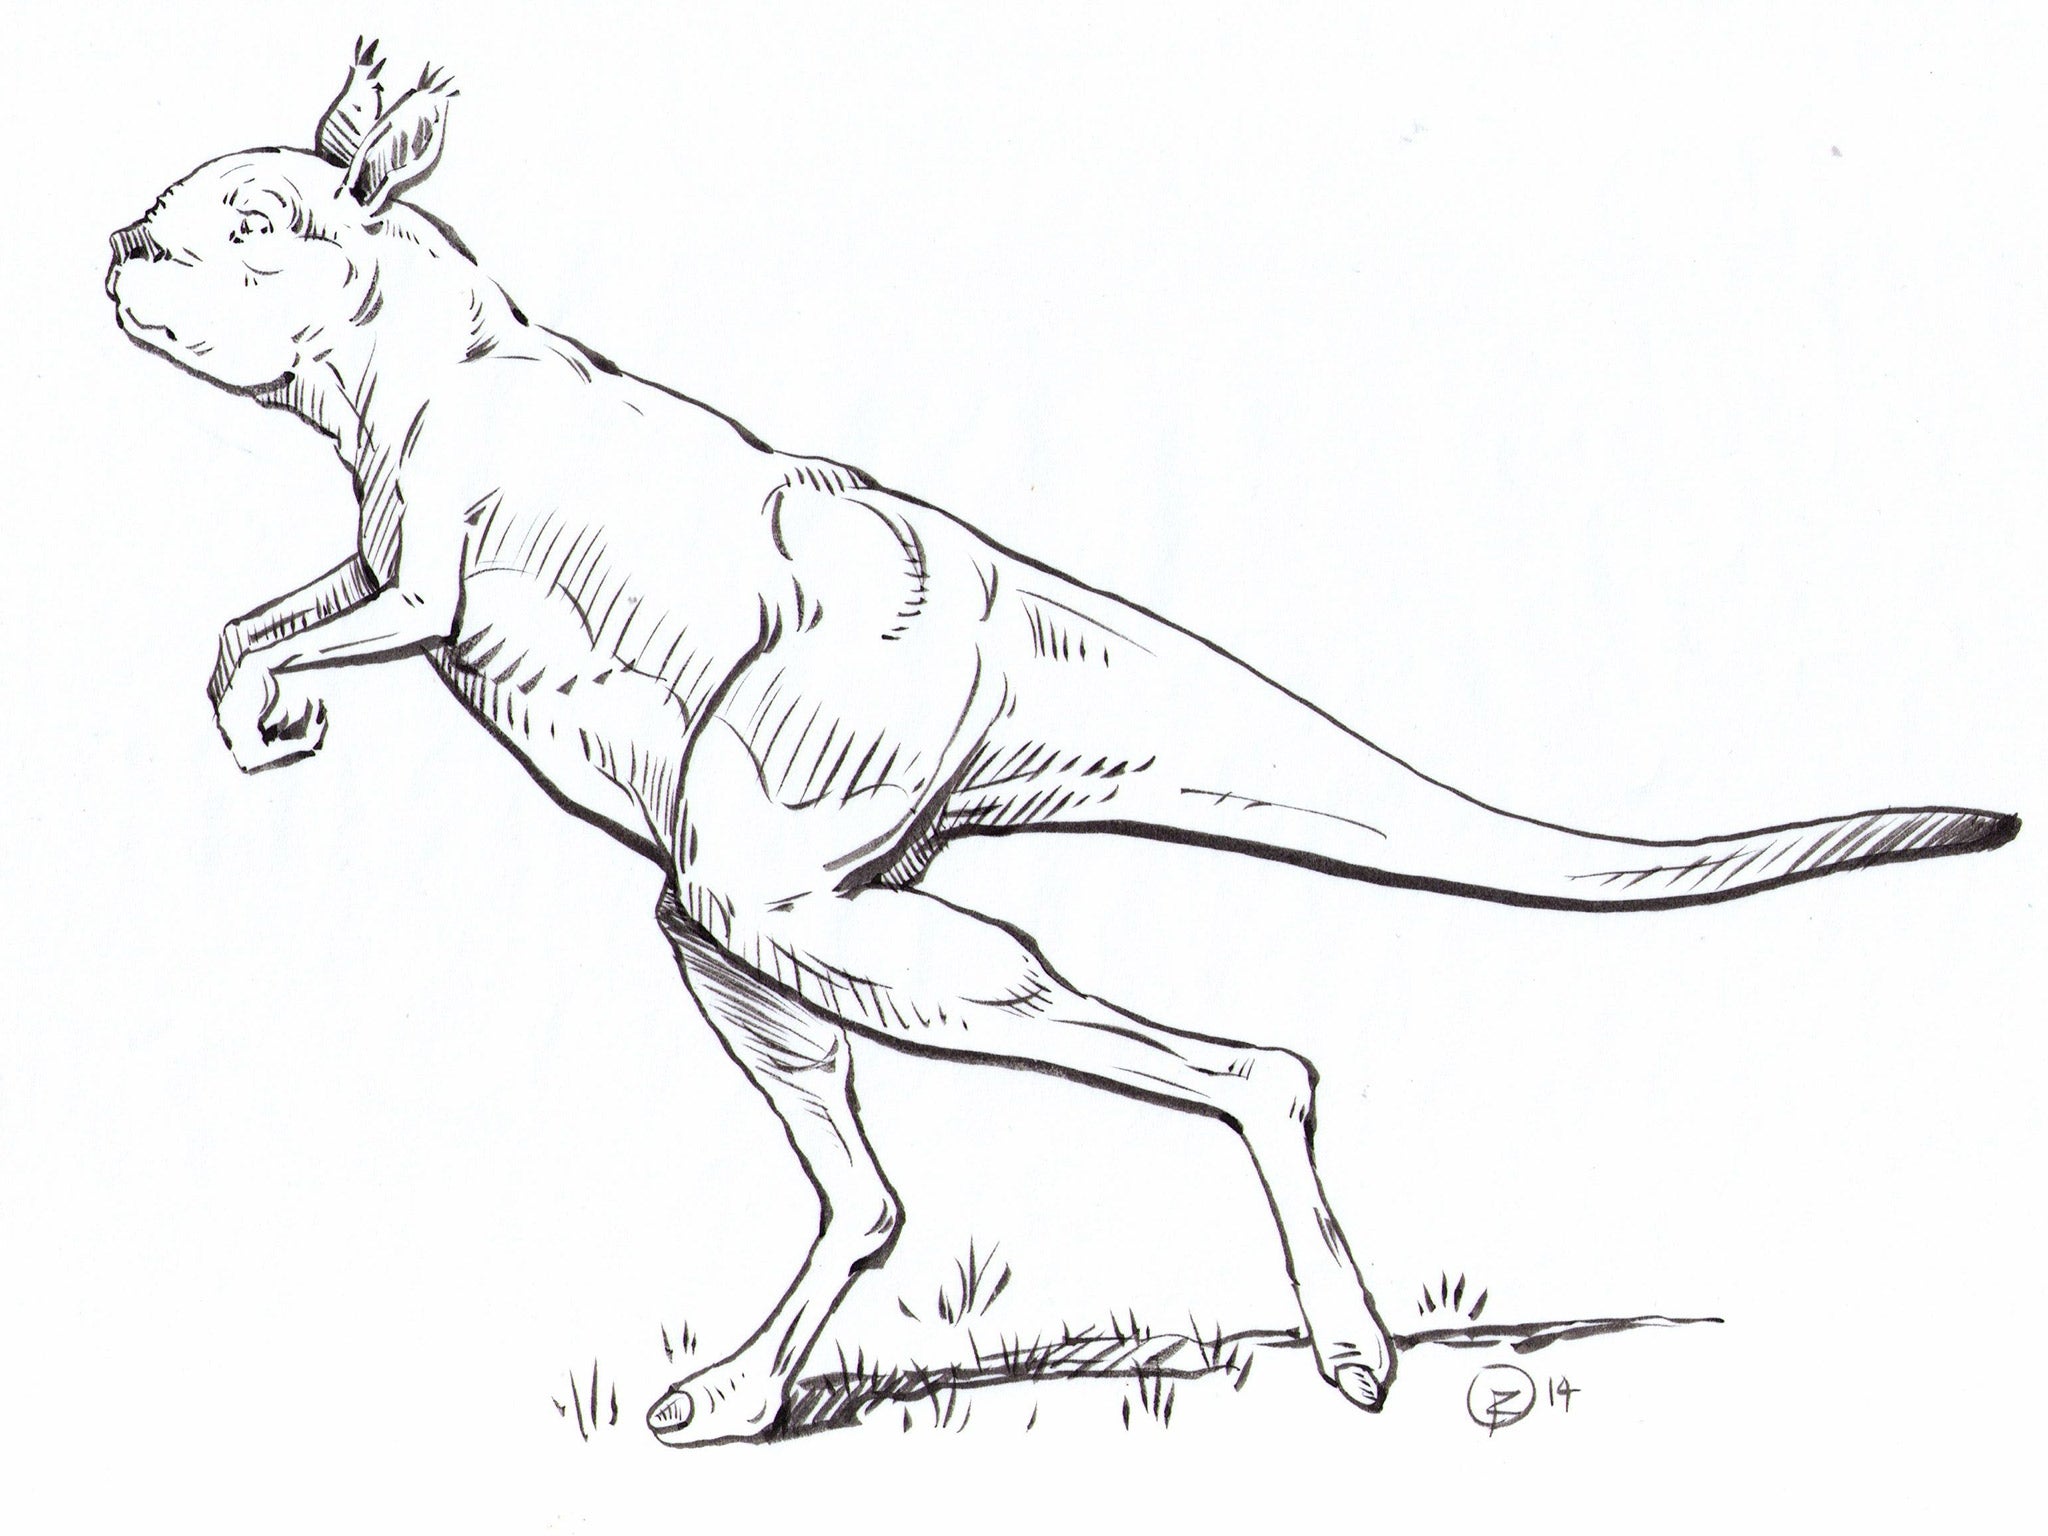 A recreation of the short-faced marsupial, which died out when modern humans arrived in Australia